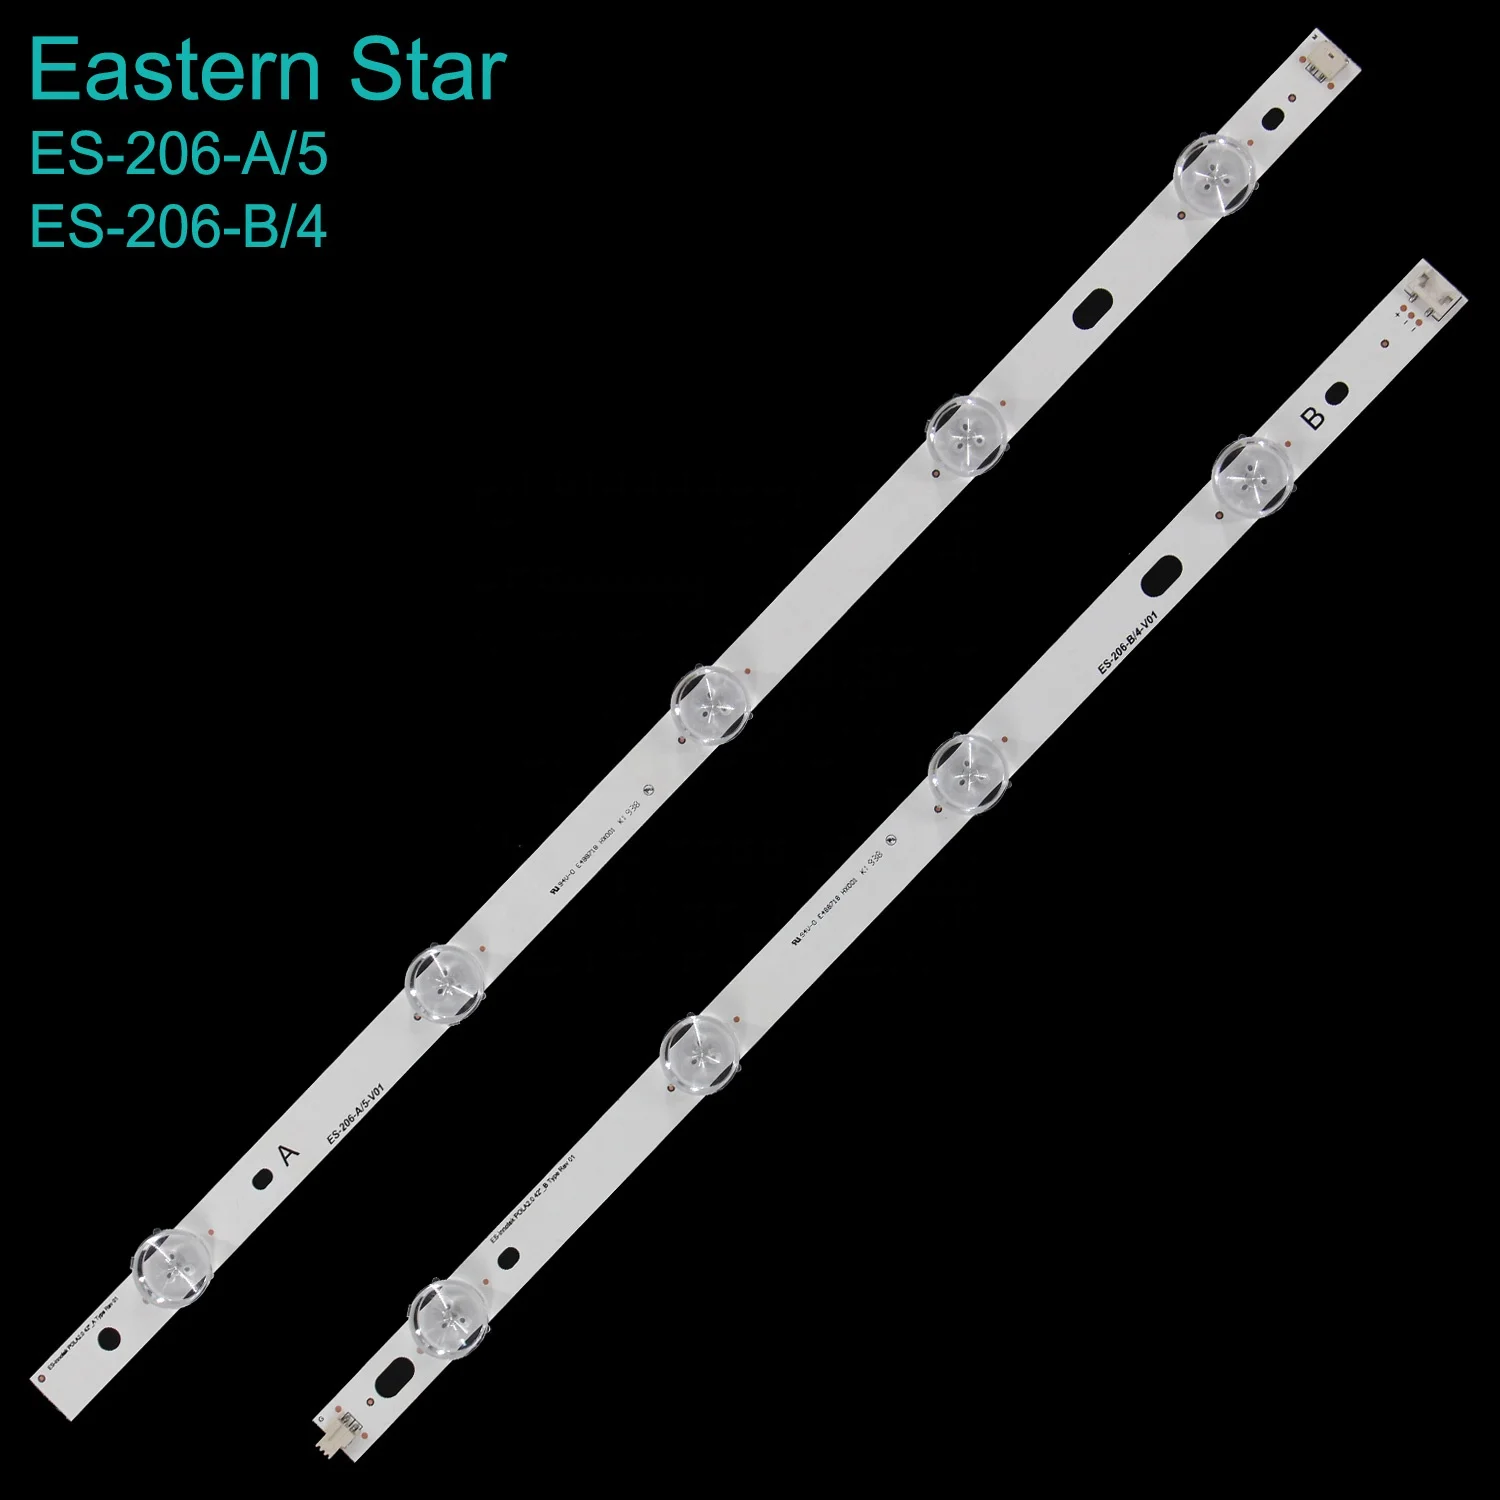 ES-206 LED Backlight Strips Innote POLA2.0 42'' A/B Type use for LG 42'' 4+5 42LN5300/42LN5400